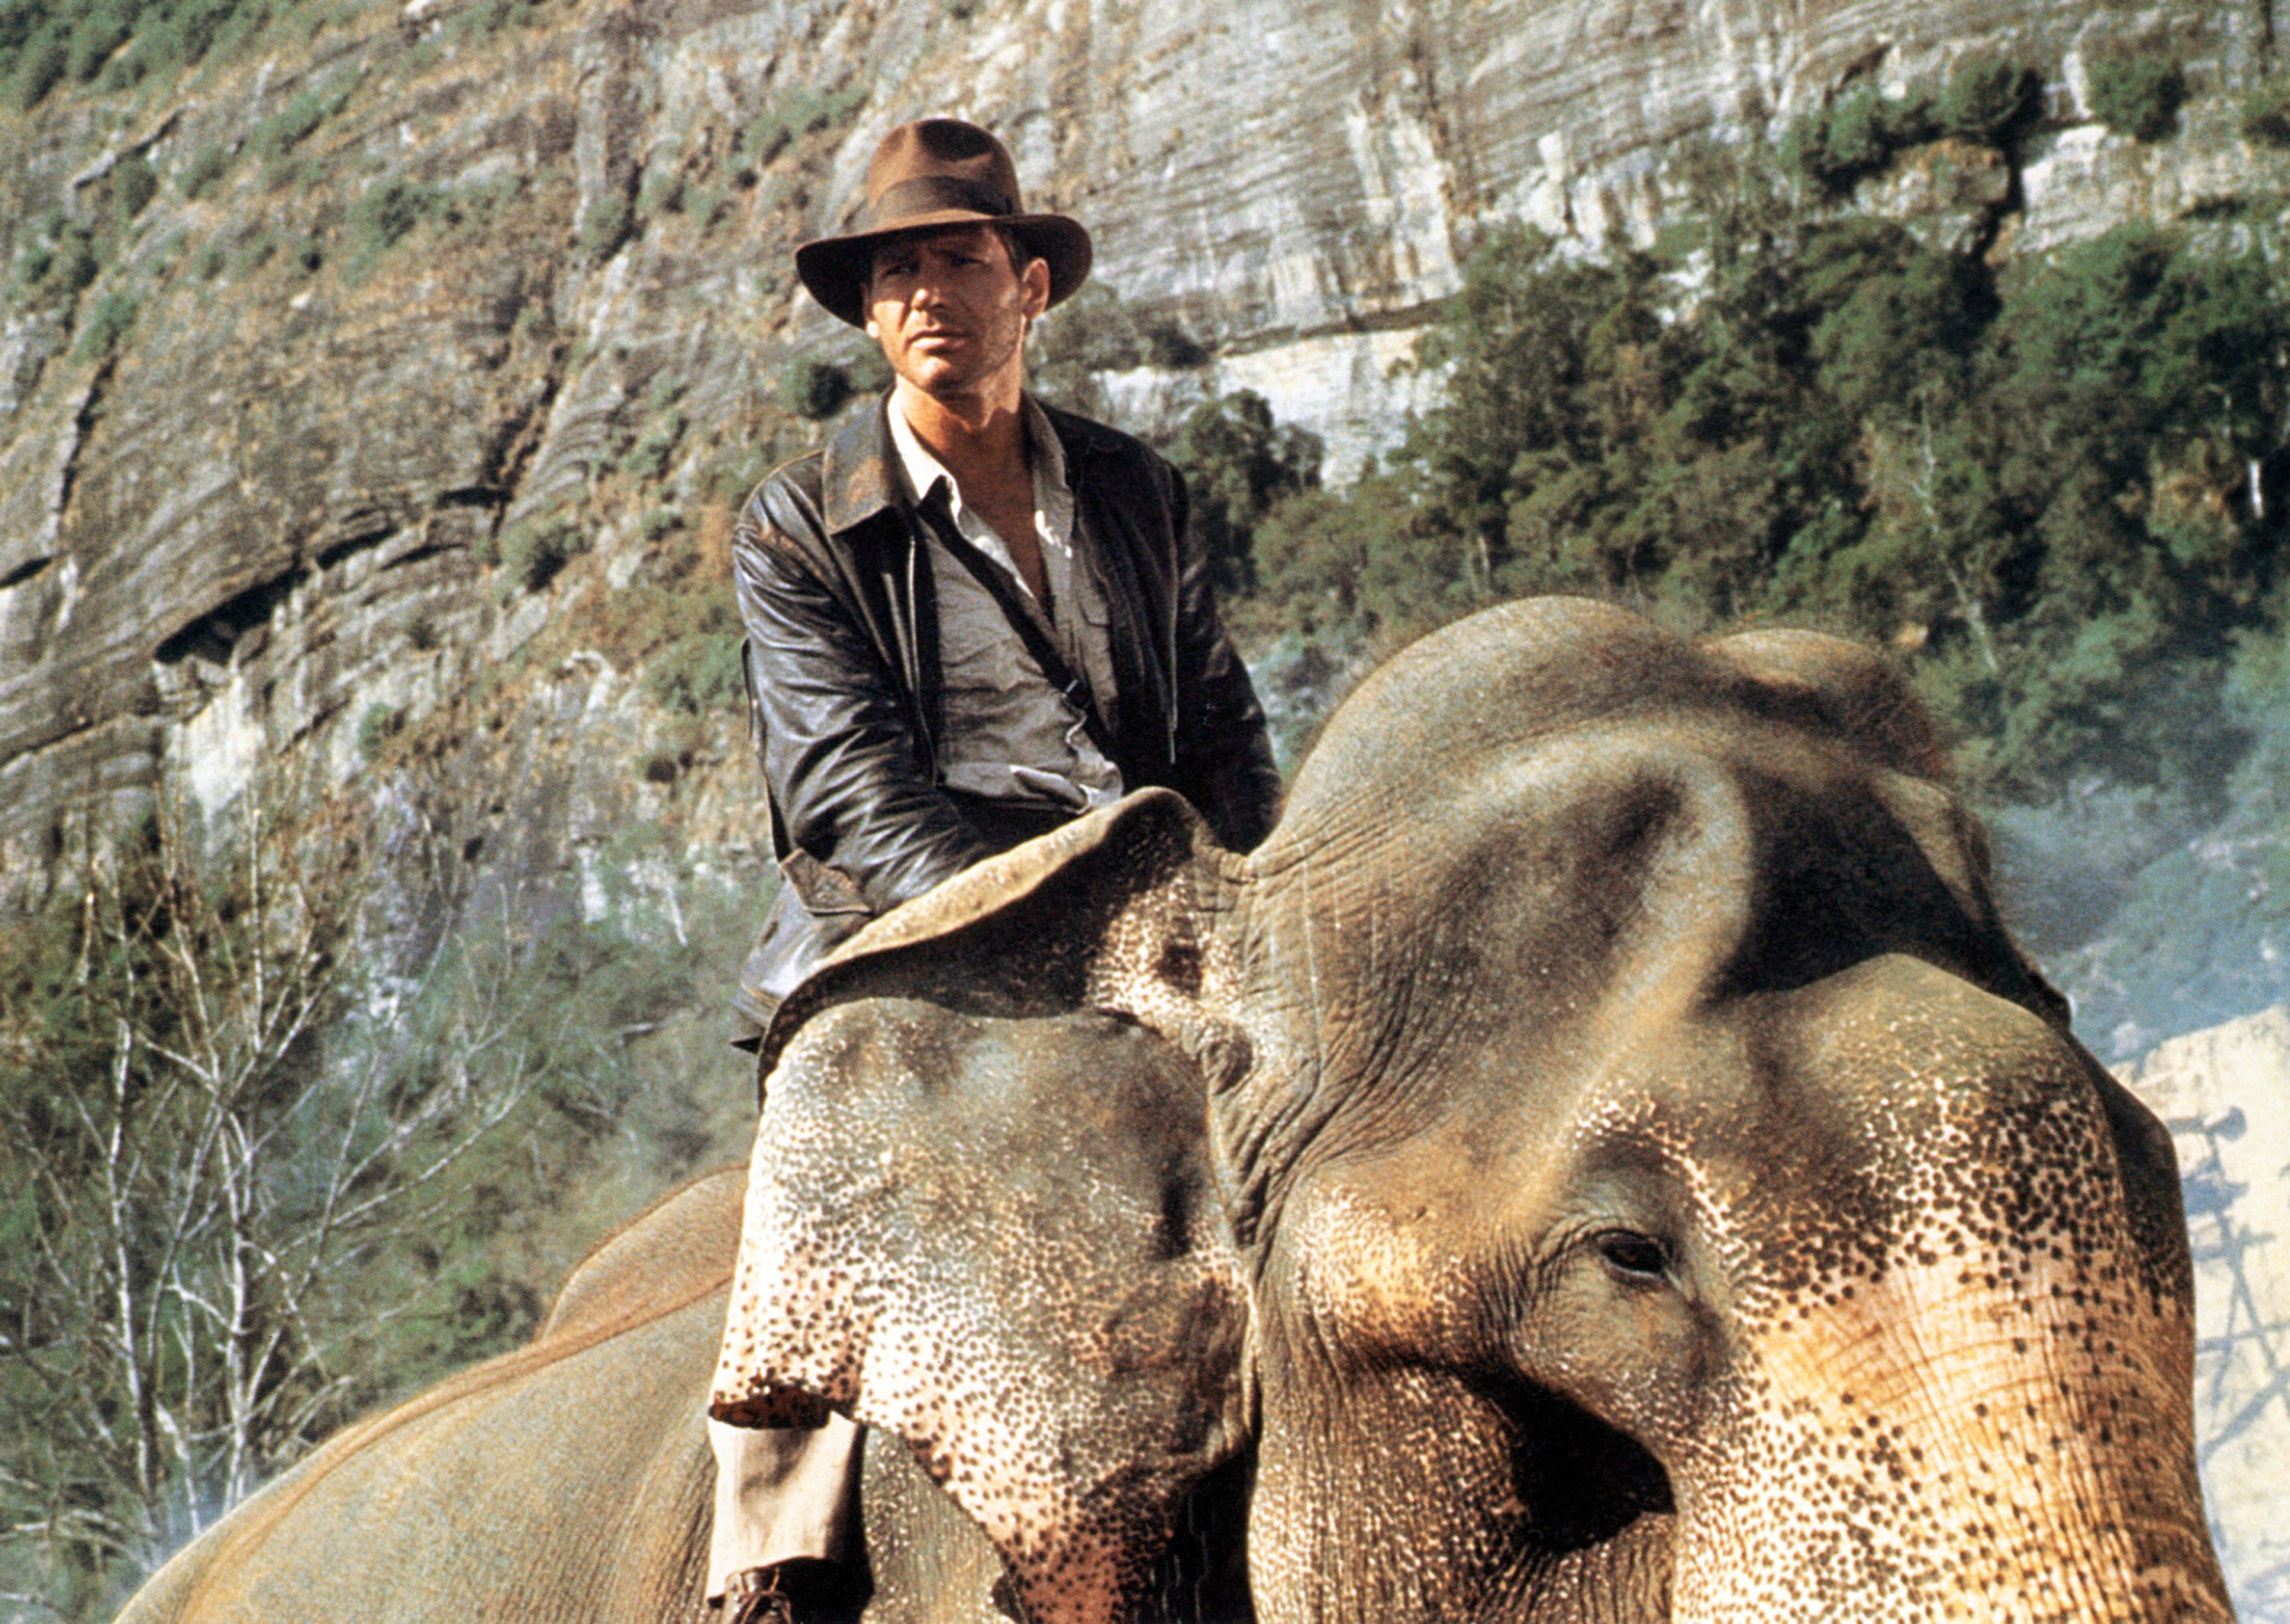 Harrison Ford as Indiana Jones riding an elephant in &quot;Indiana Jones&quot;